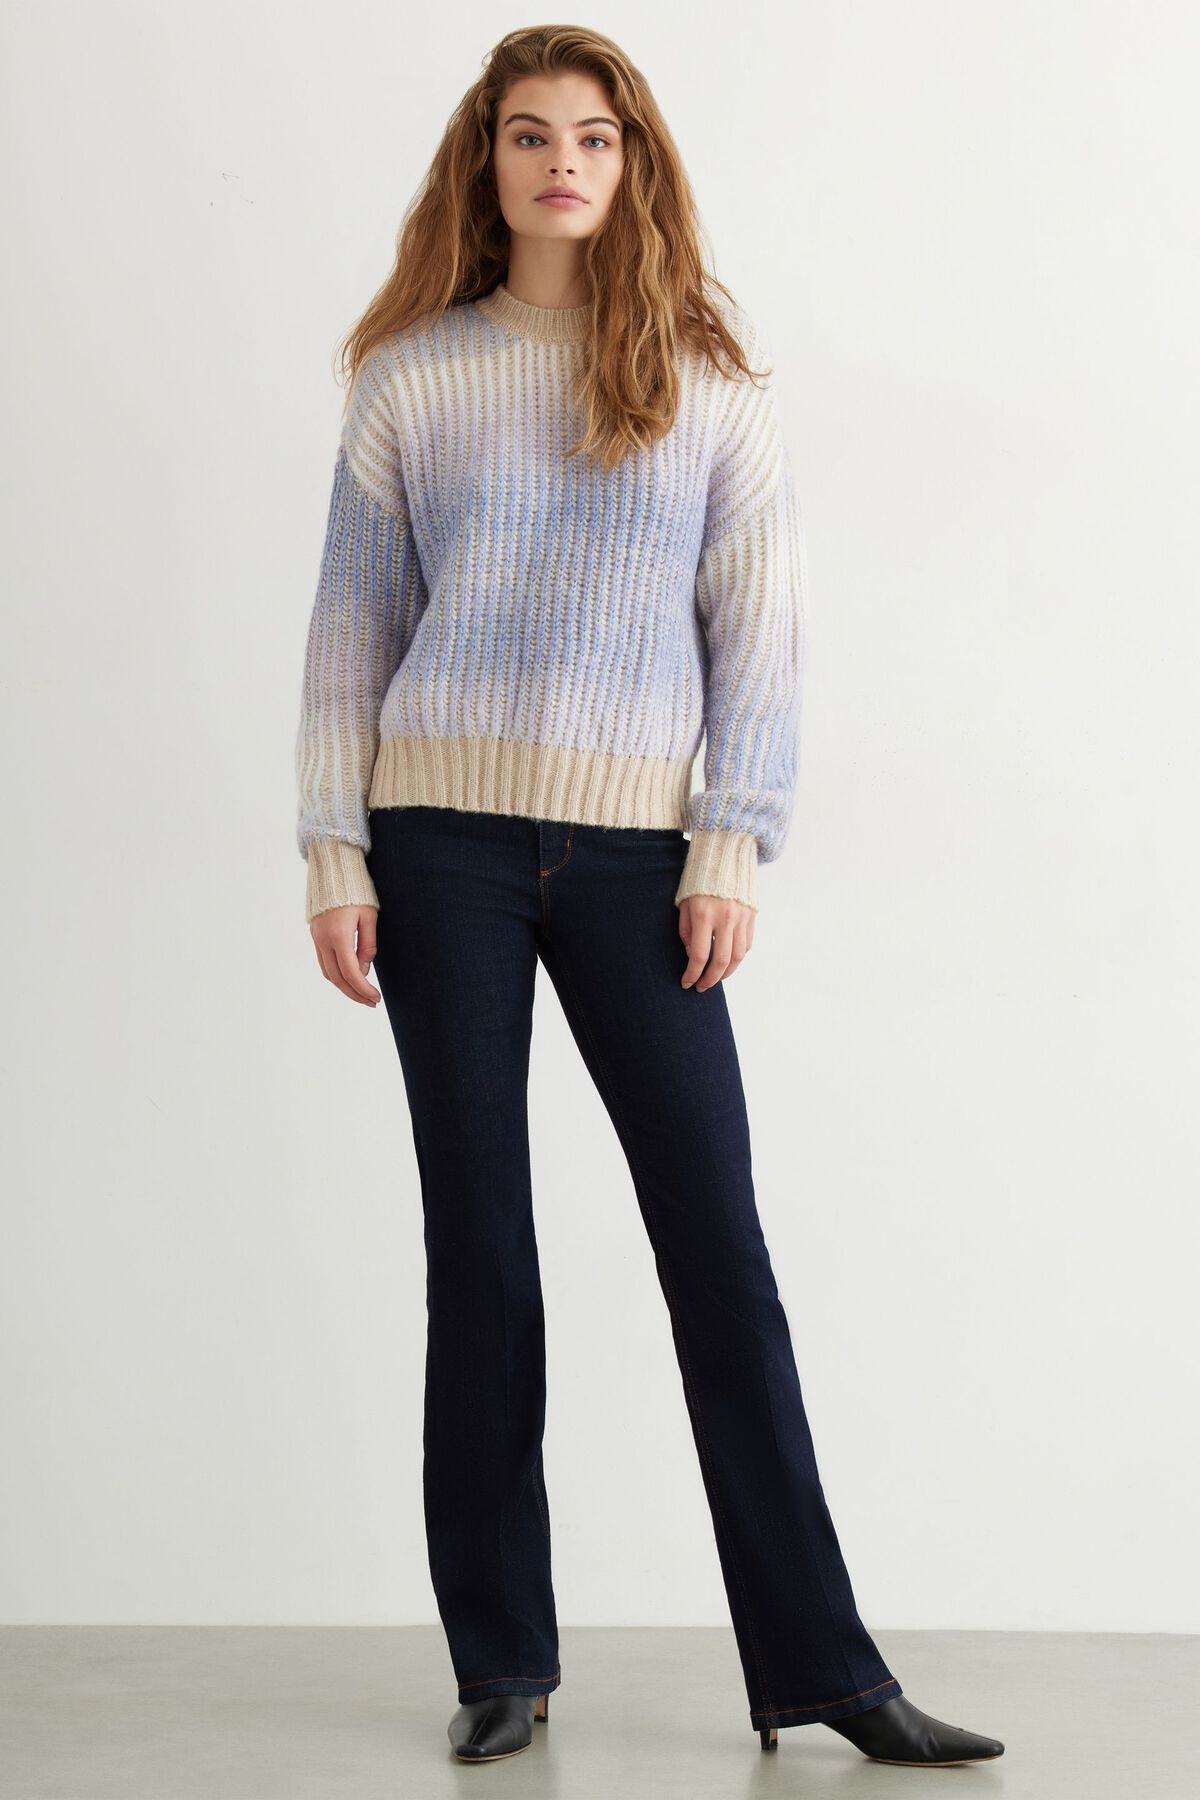 Dynamite Textured Ombre Sweater. 2